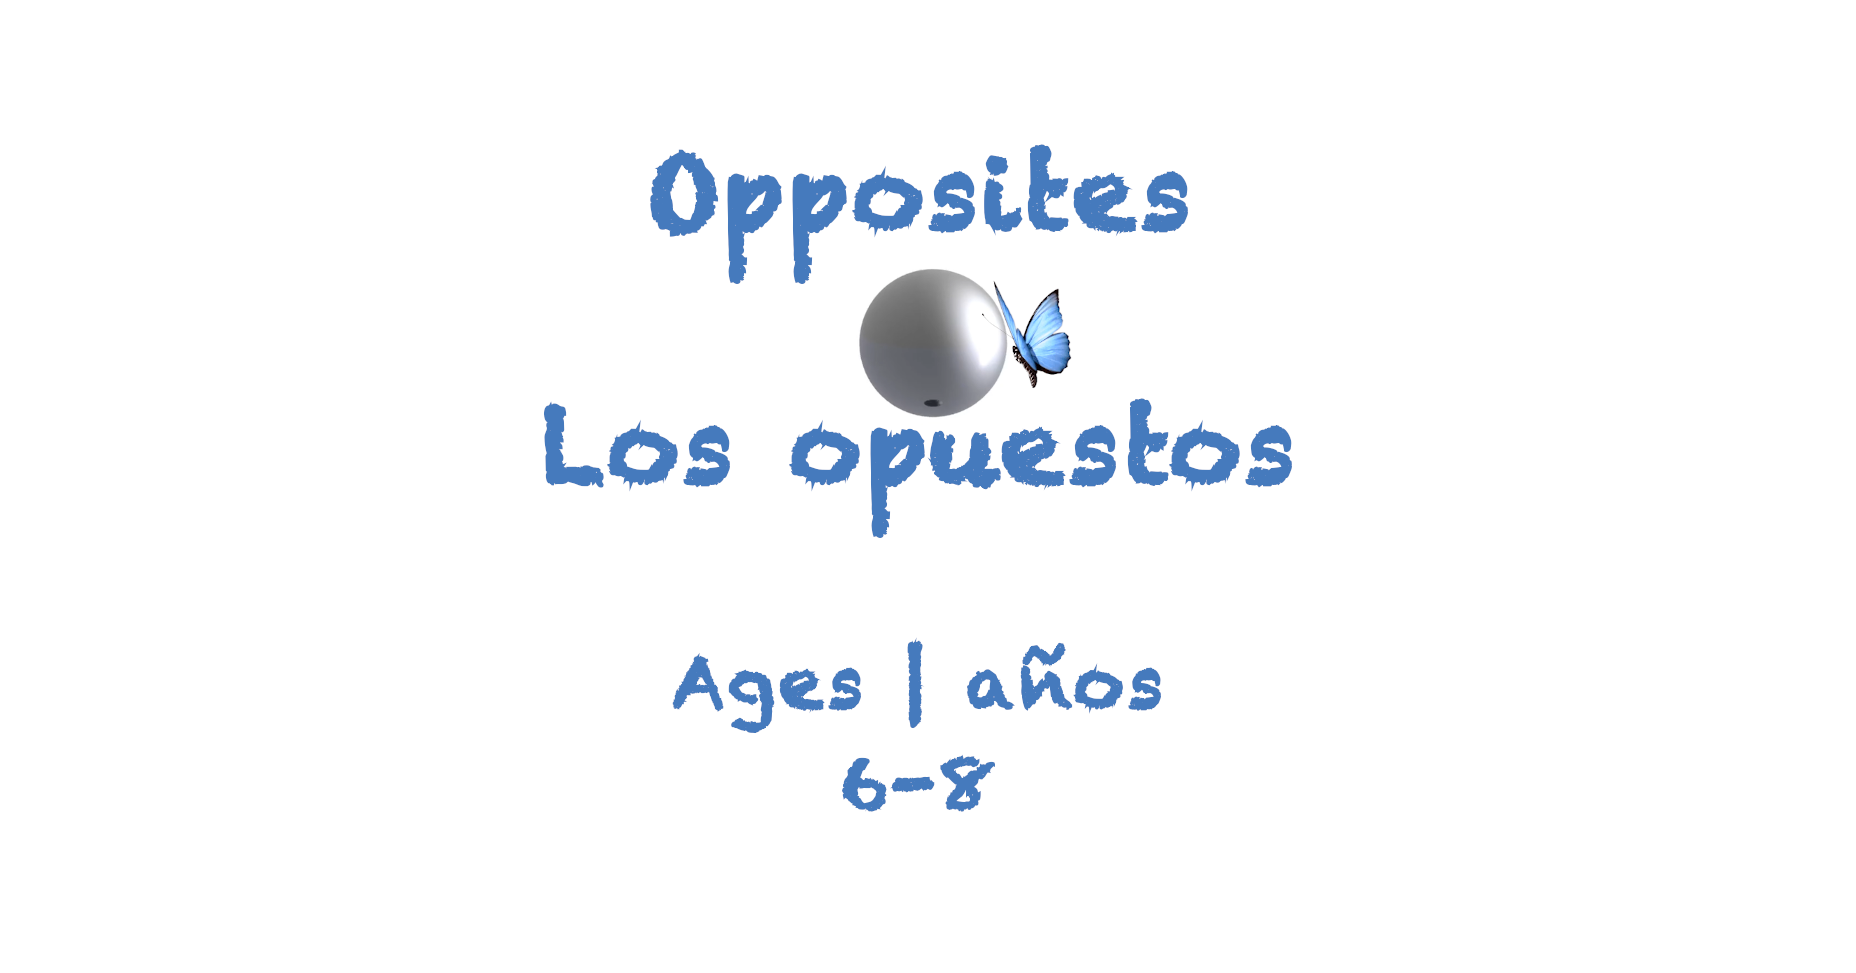 Opposites for 6-8 year olds